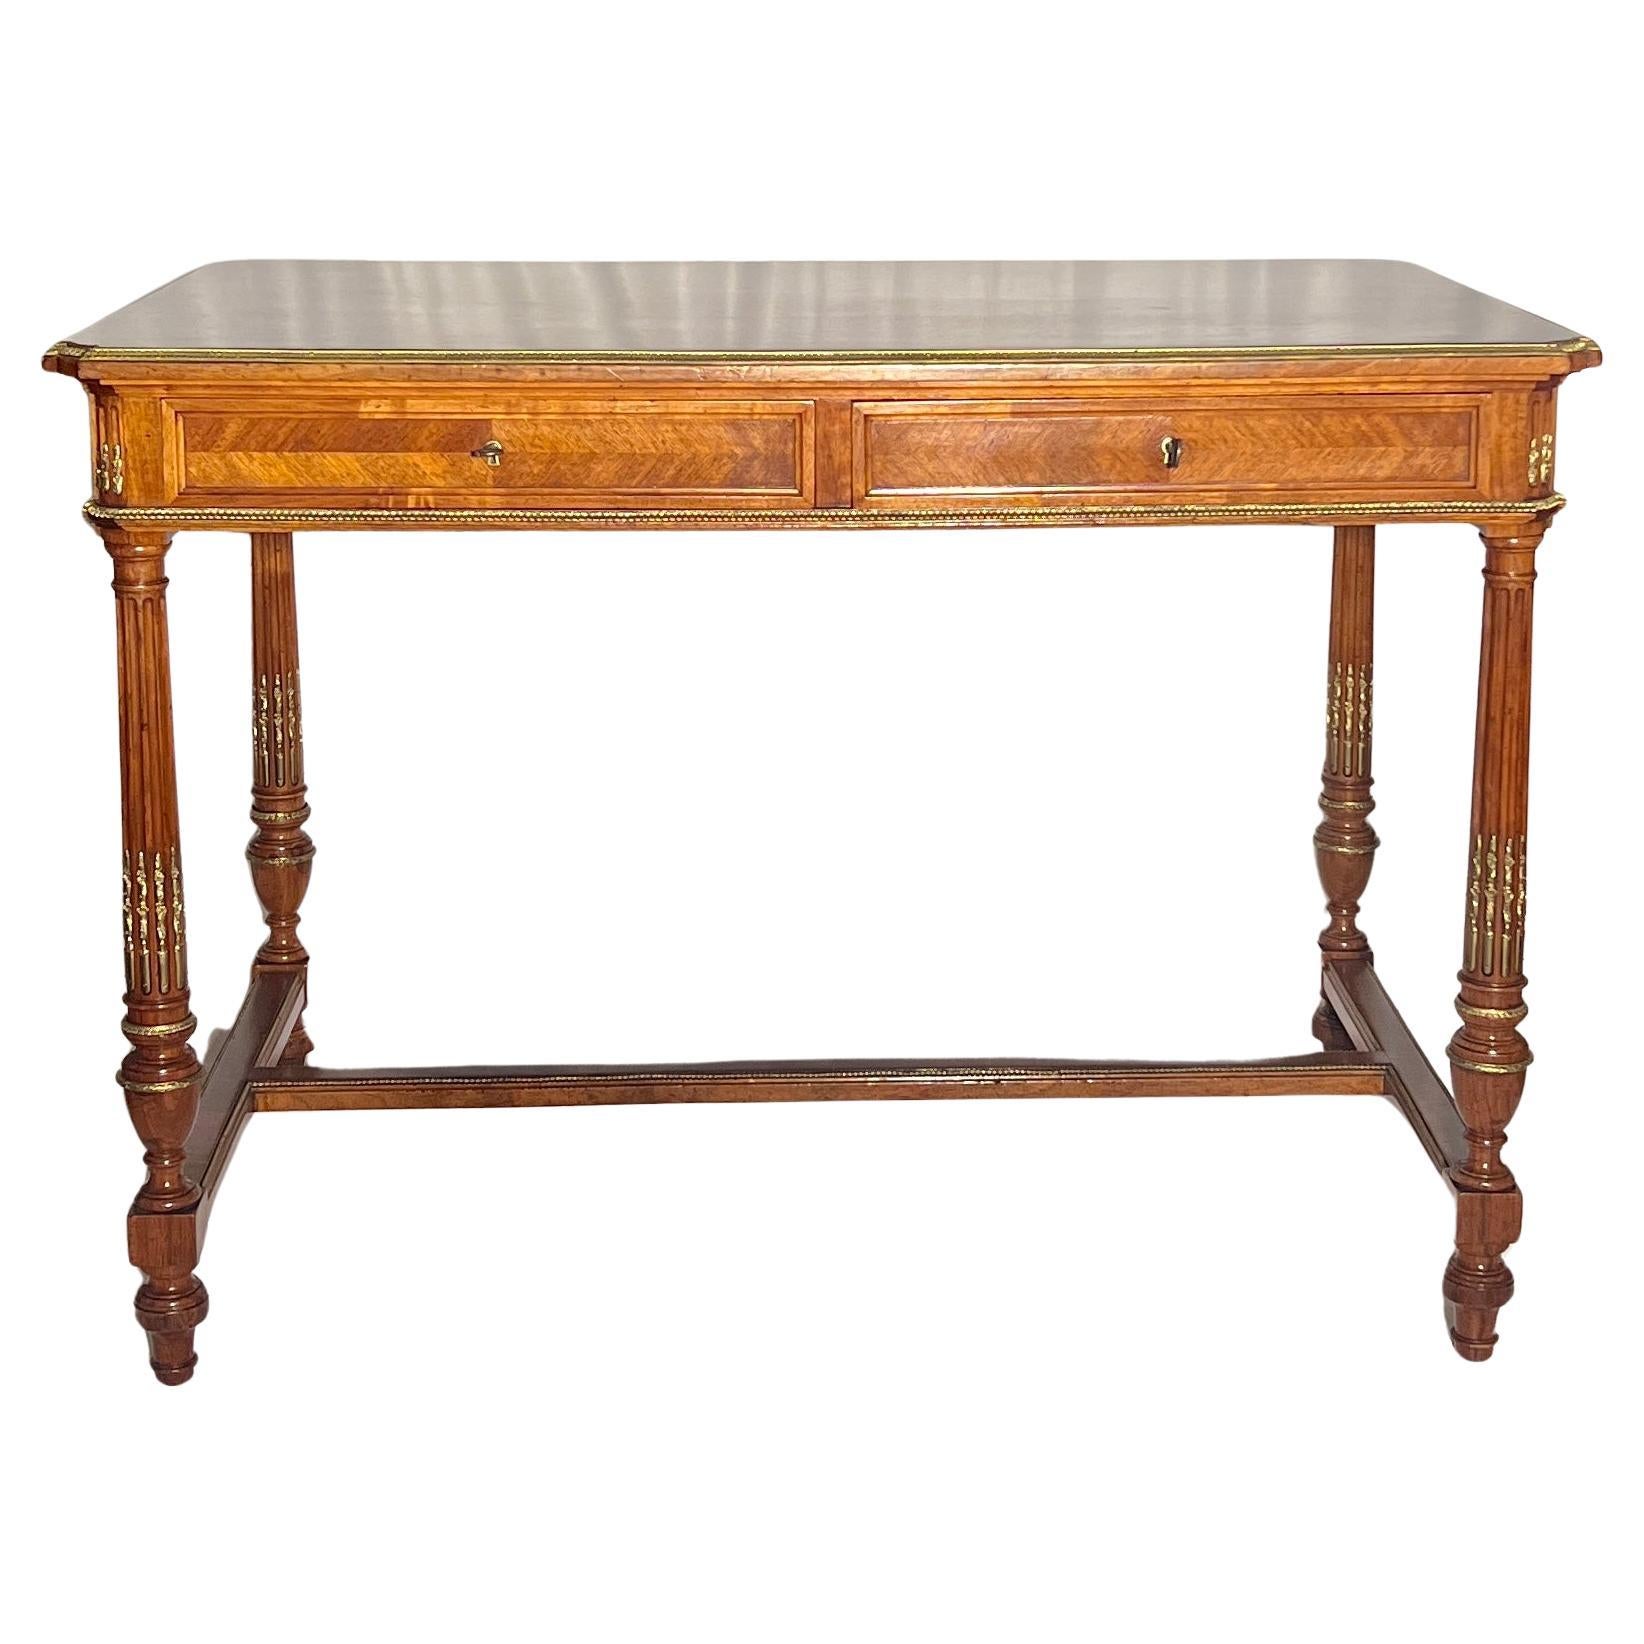 Antique French Louis XVI Gold Bronze Mounted Kingwood Writing Table, Circa 1885.